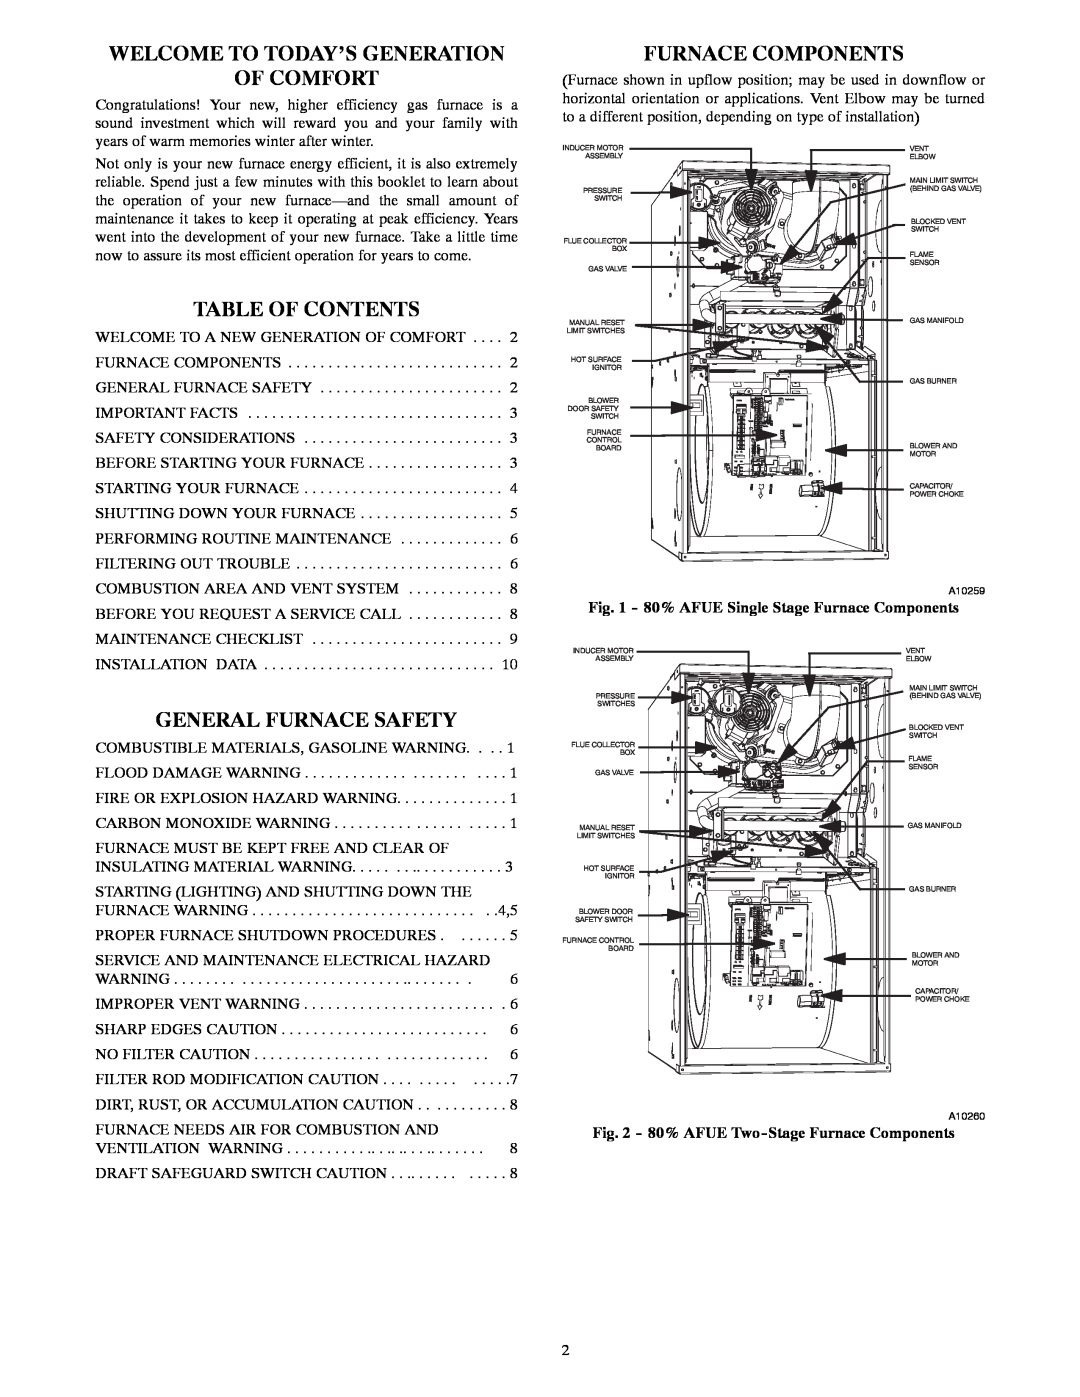 Bryant A10252 Welcome To Today’S Generation Of Comfort, Furnace Components, Table Of Contents, General Furnace Safety 